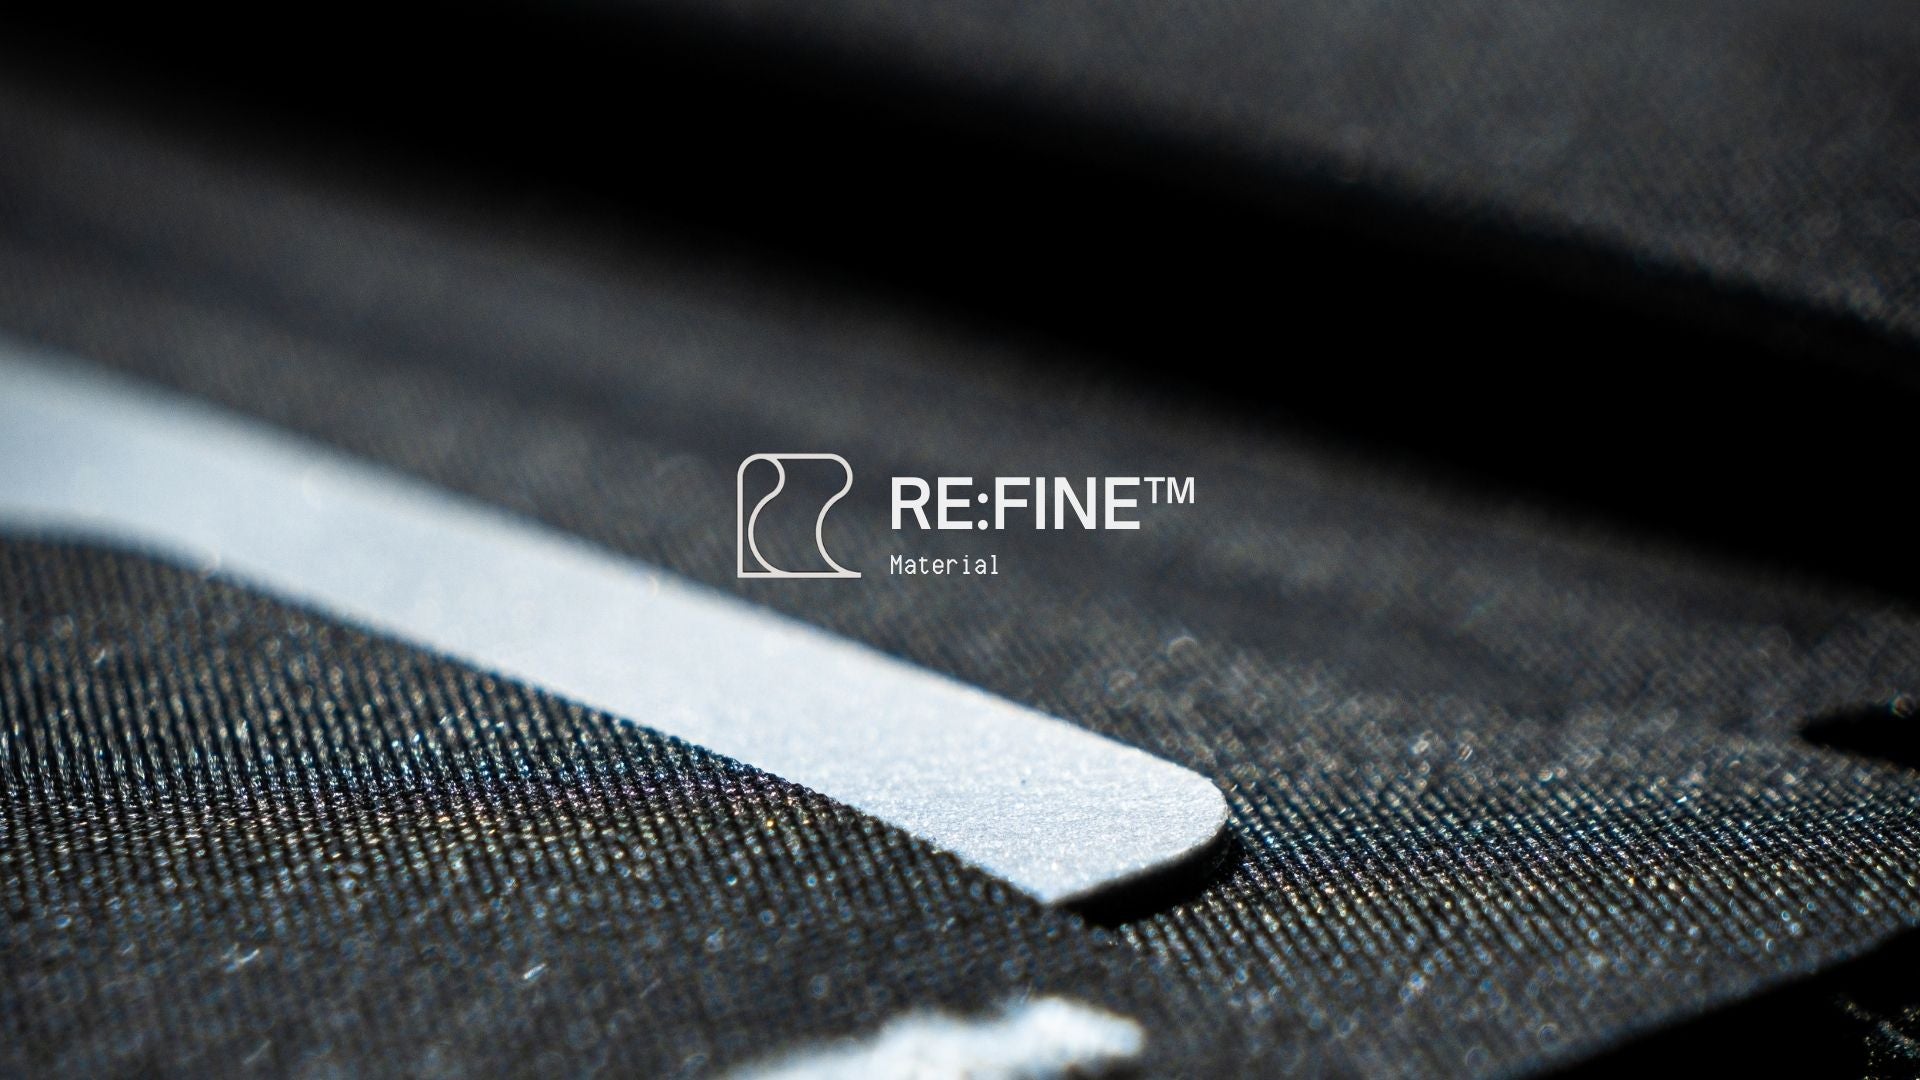 RE:FORM Wallets are Made from Super Slim and Extremely Sturdy RE:FINE Material